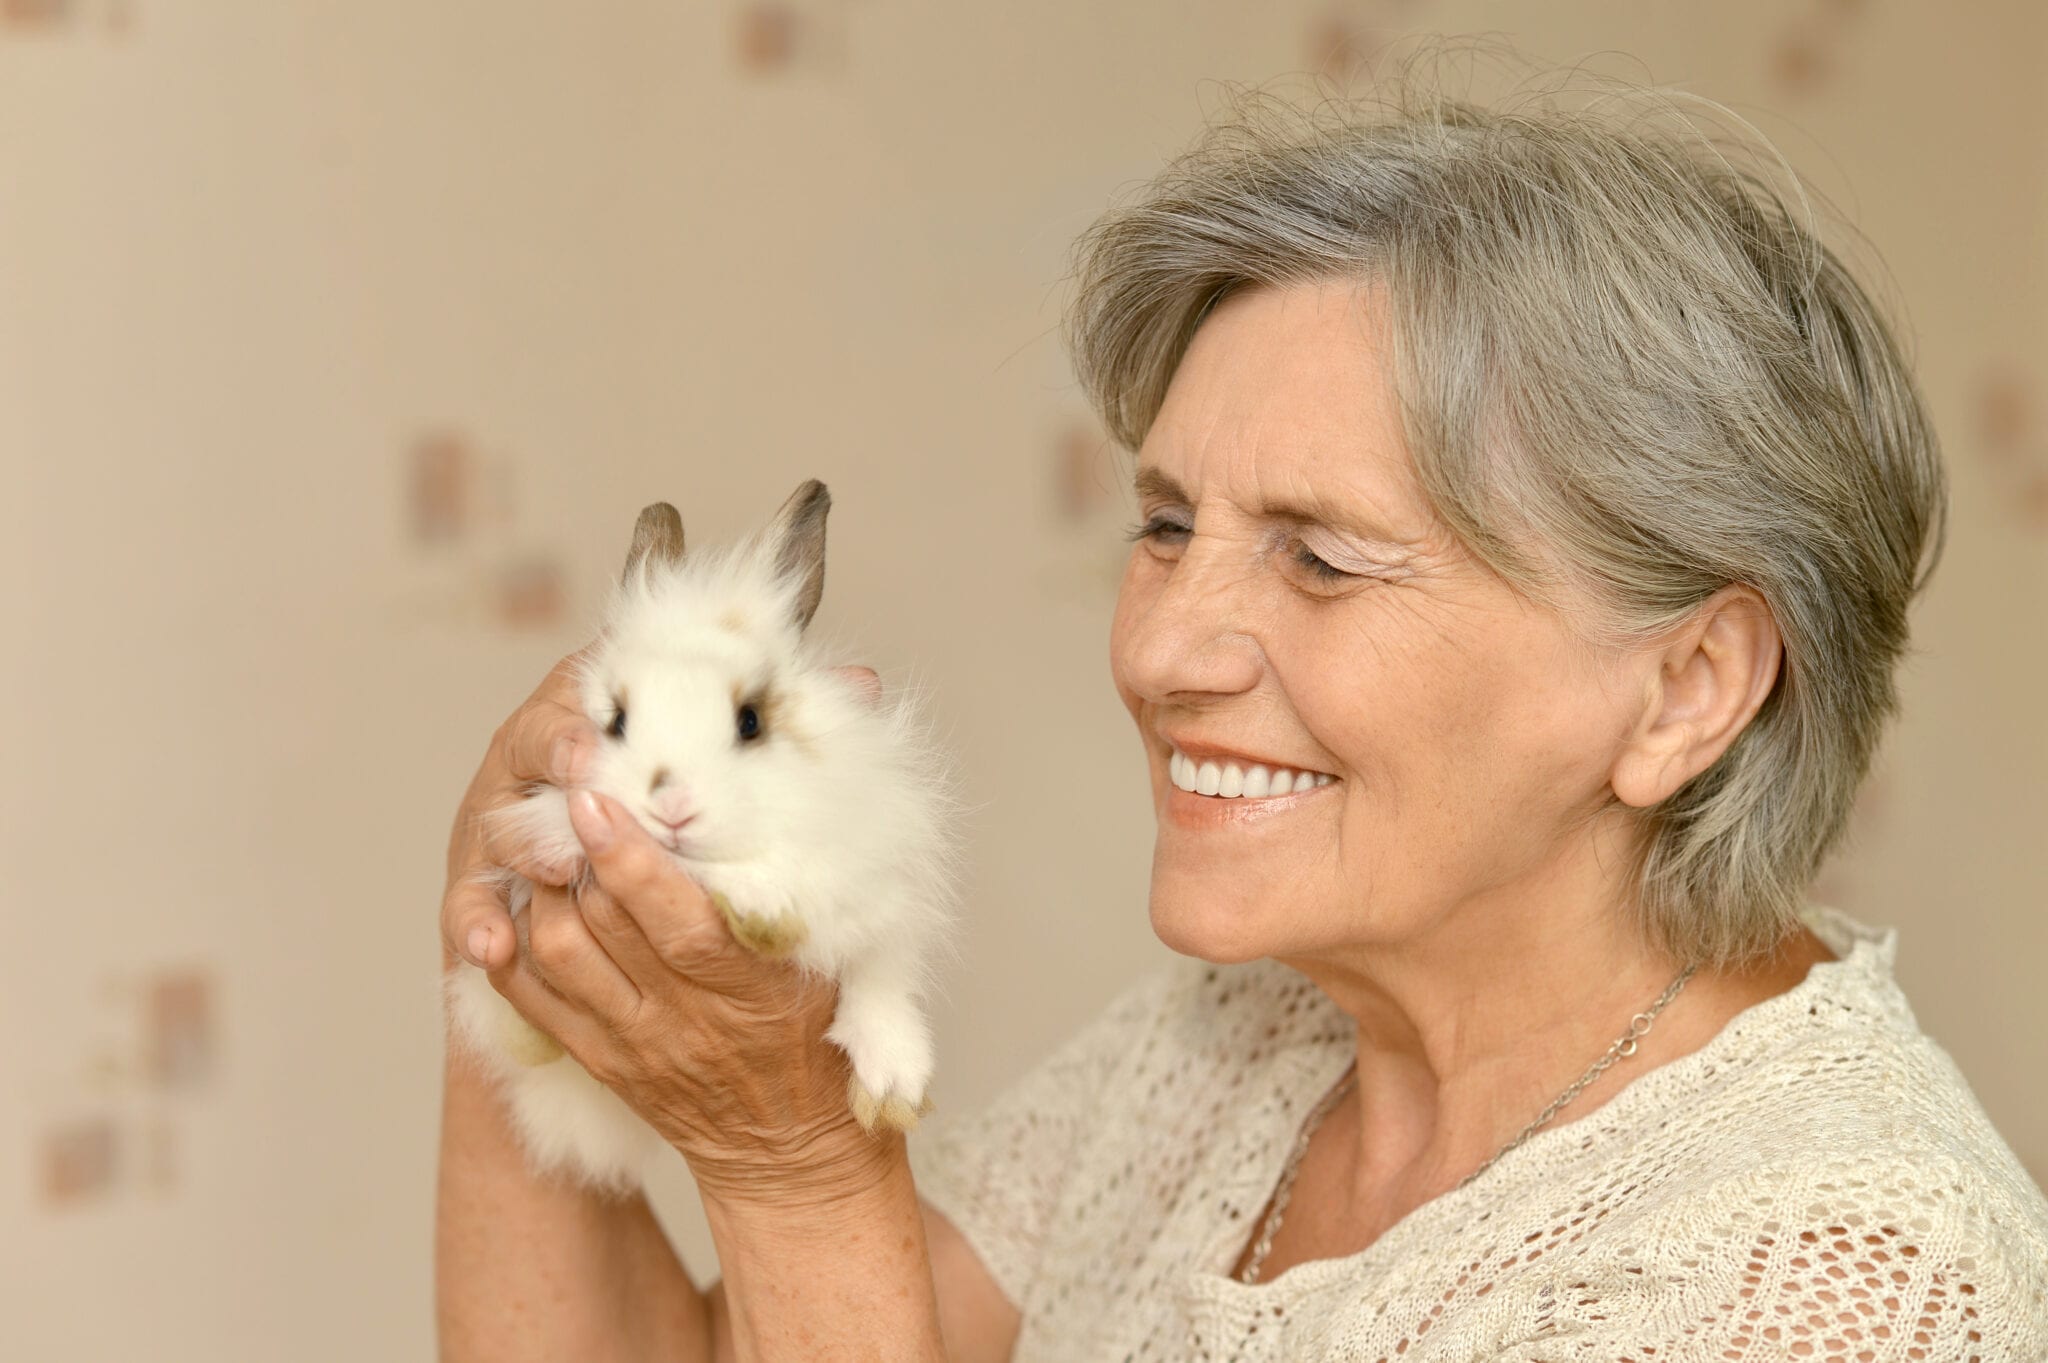 Animal Therapy in Care Homes